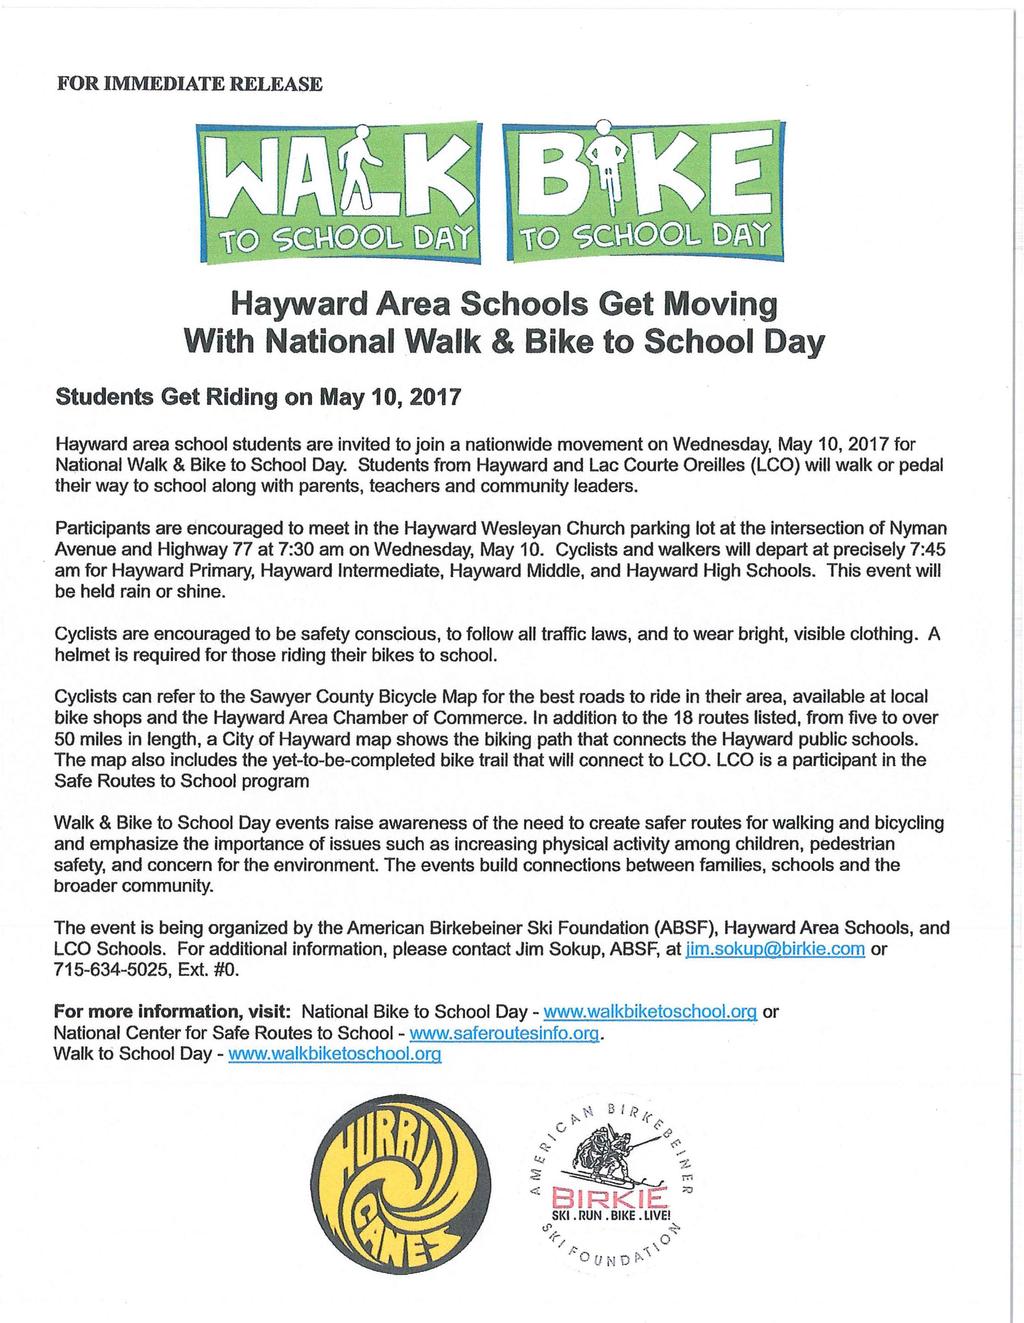 FOR IMMEDIATE RELEASE D D Hayward Area Schools Get Moving With National Walk & Bike to School Day Students Get Riding on May 10, 2017 Hayward area school students are invited to join a nationwide